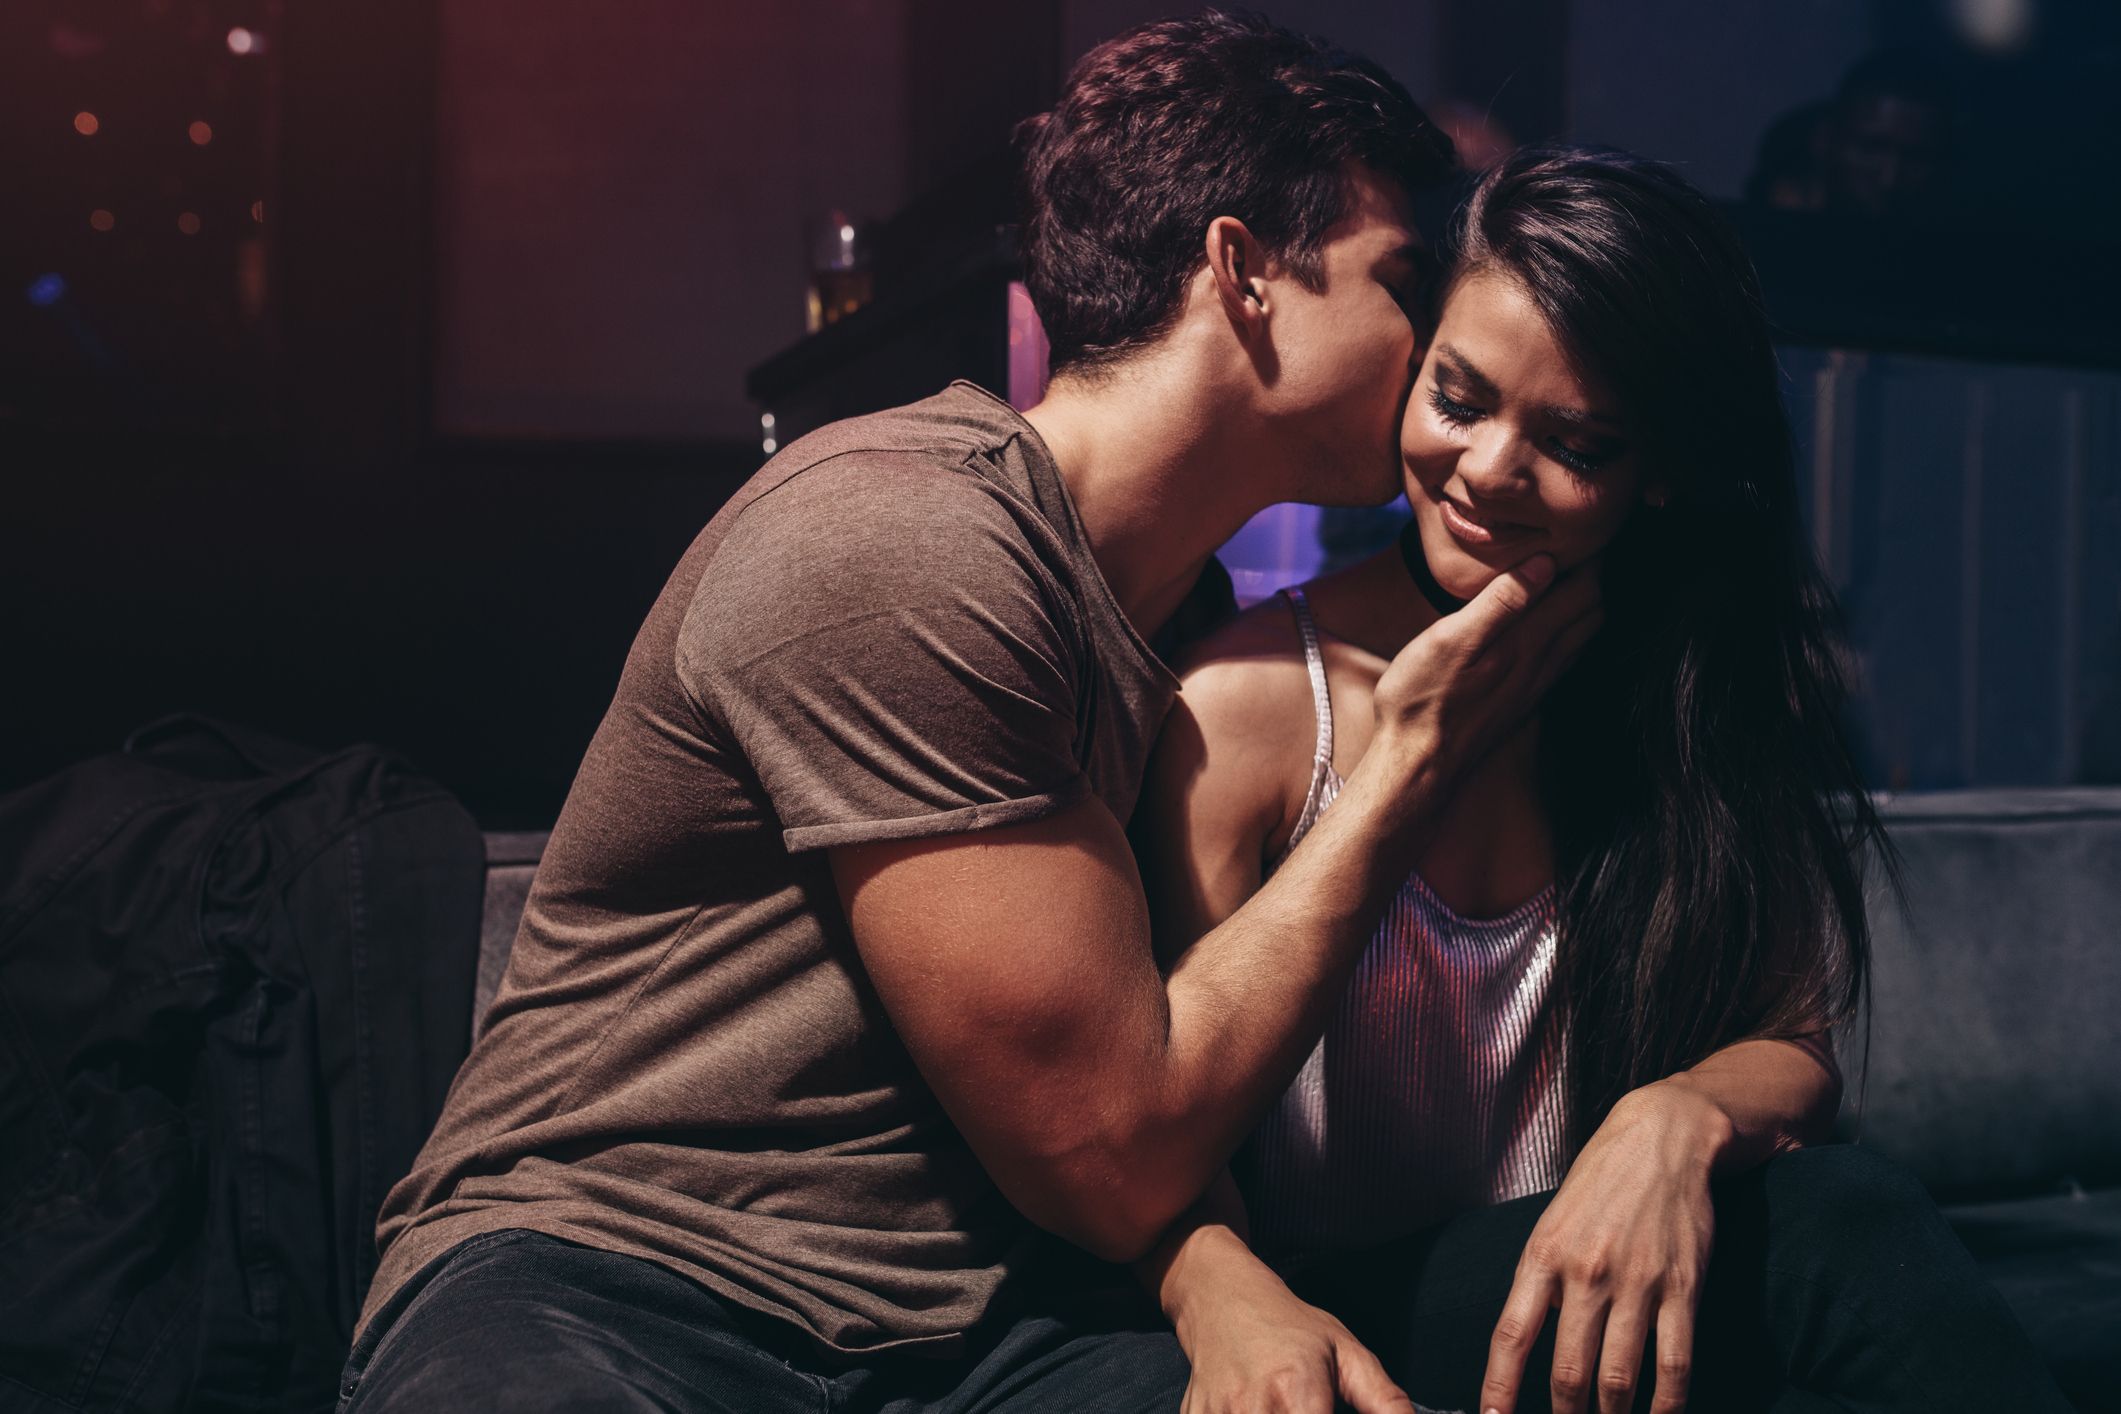 7 Sex Party Tips for Couples Who Want to Go Together